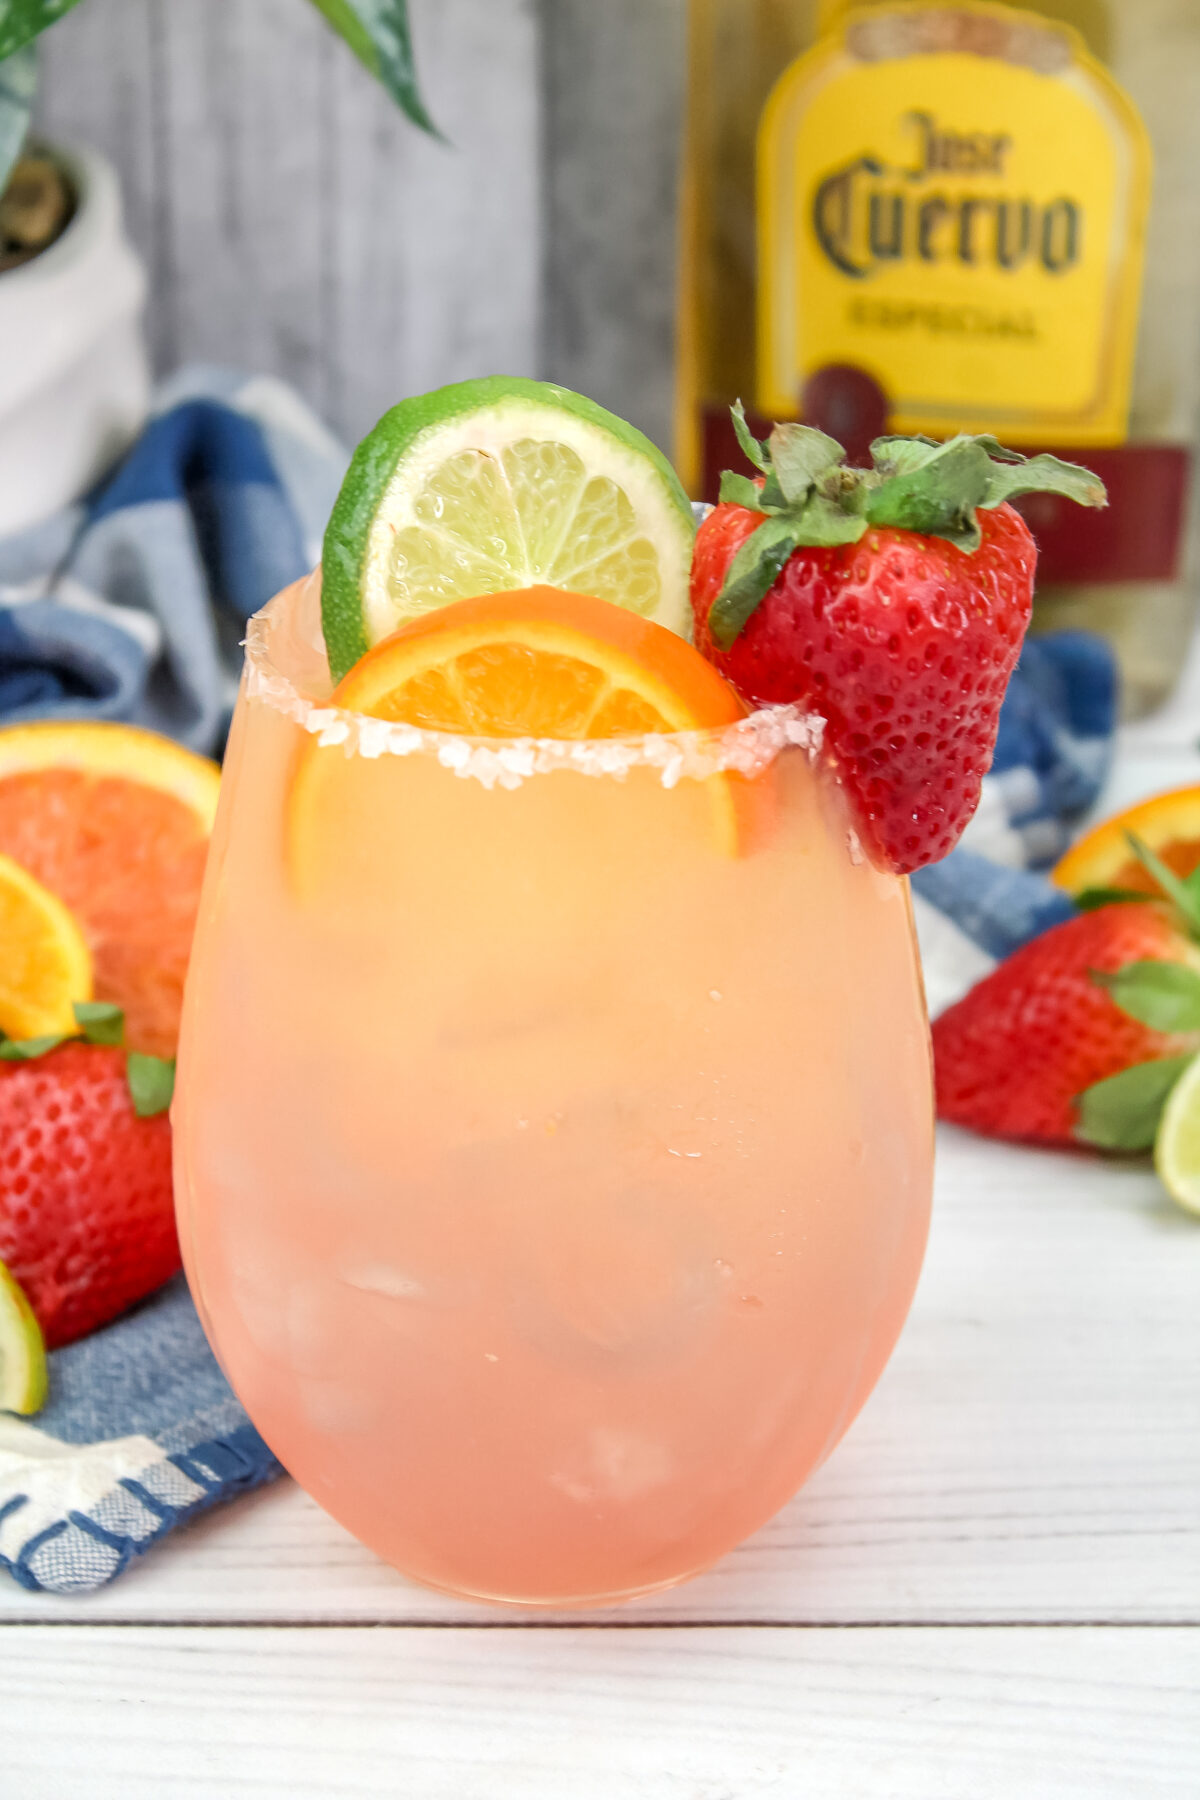 Create a delicious blend of citrus and berry flavors with this easy Orange Kiwi Berry Margarita recipe. Perfect for summertime sipping!